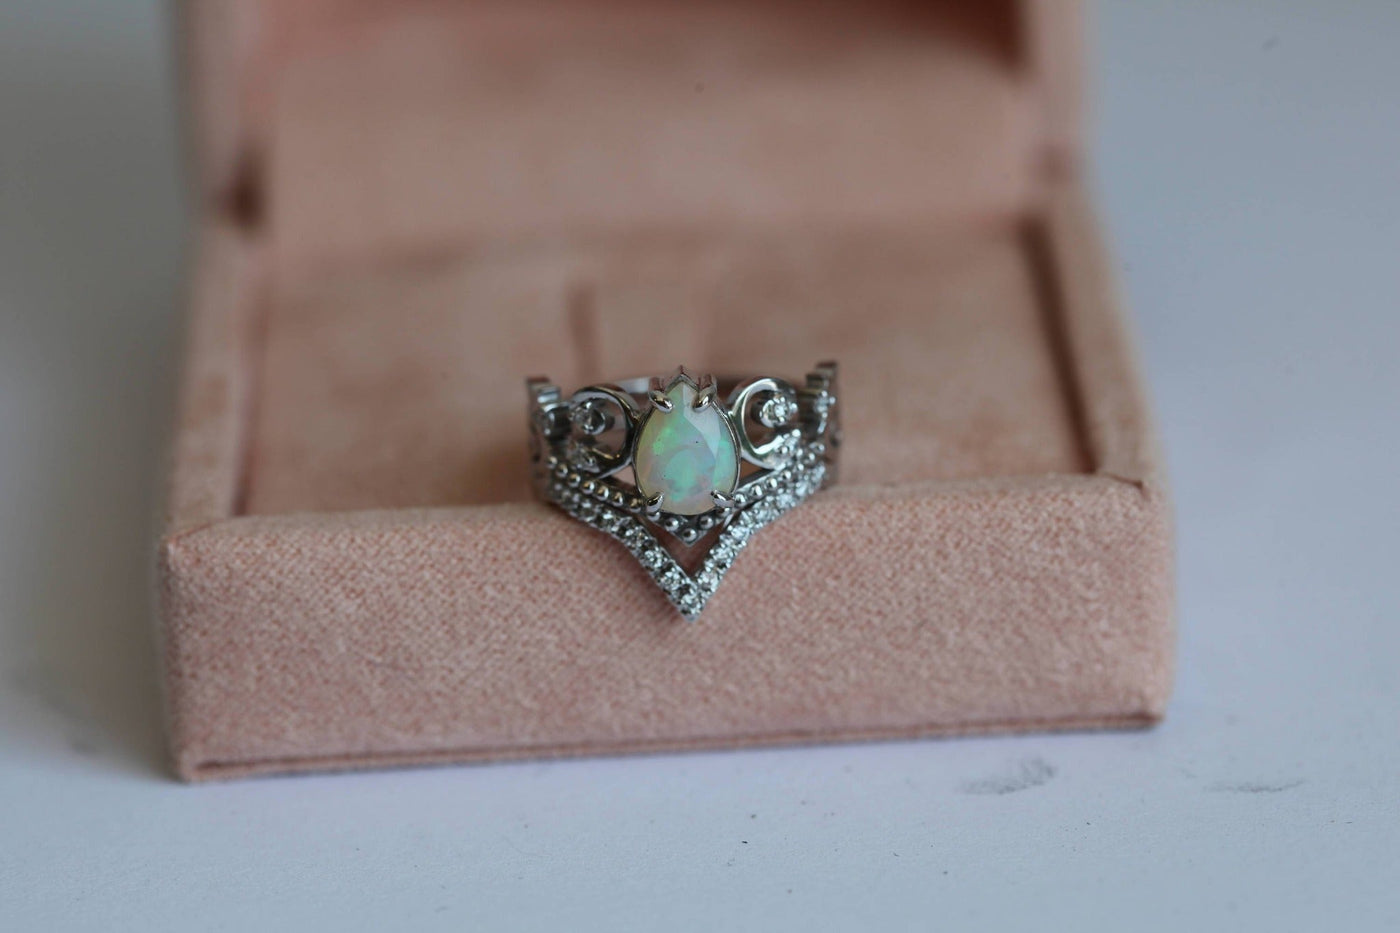 White Pear Opal Vintage Ring Resembling A Diadem with Round White Diamonds on the Side